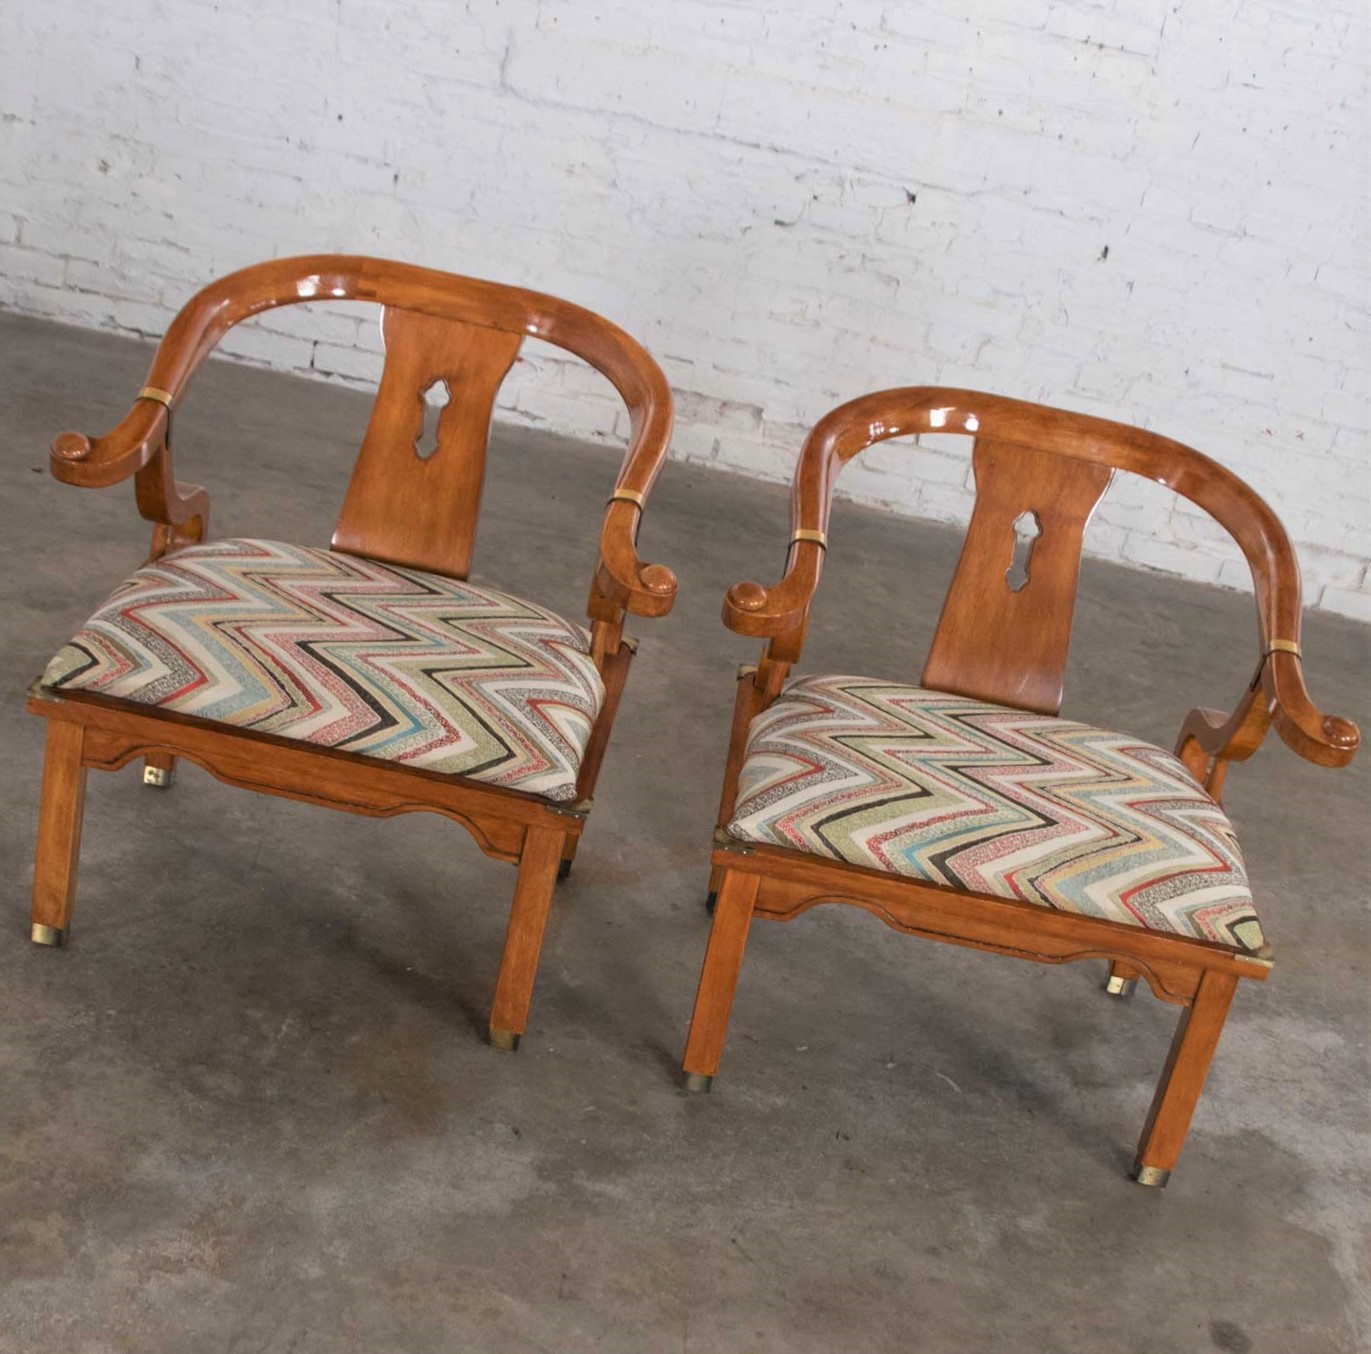 Chinoiserie Ming Style Pair of Yoke Back Lounge Chairs Attributed to Schnadig Furniture